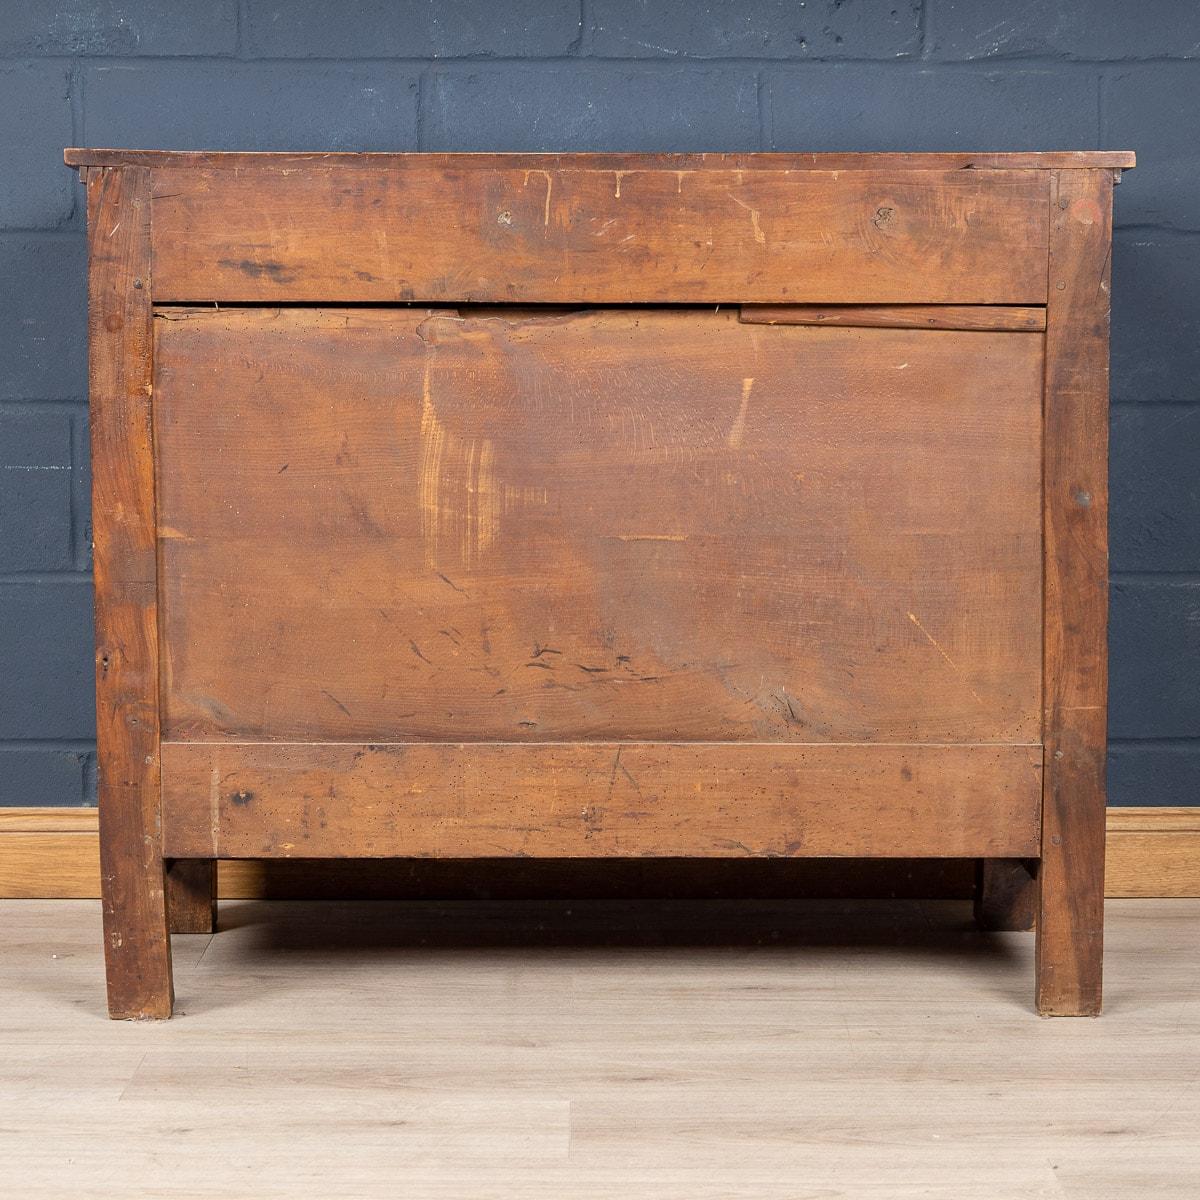 Bronze 19th Century French Walnut Empire Style Chest of Drawers, circa 1820